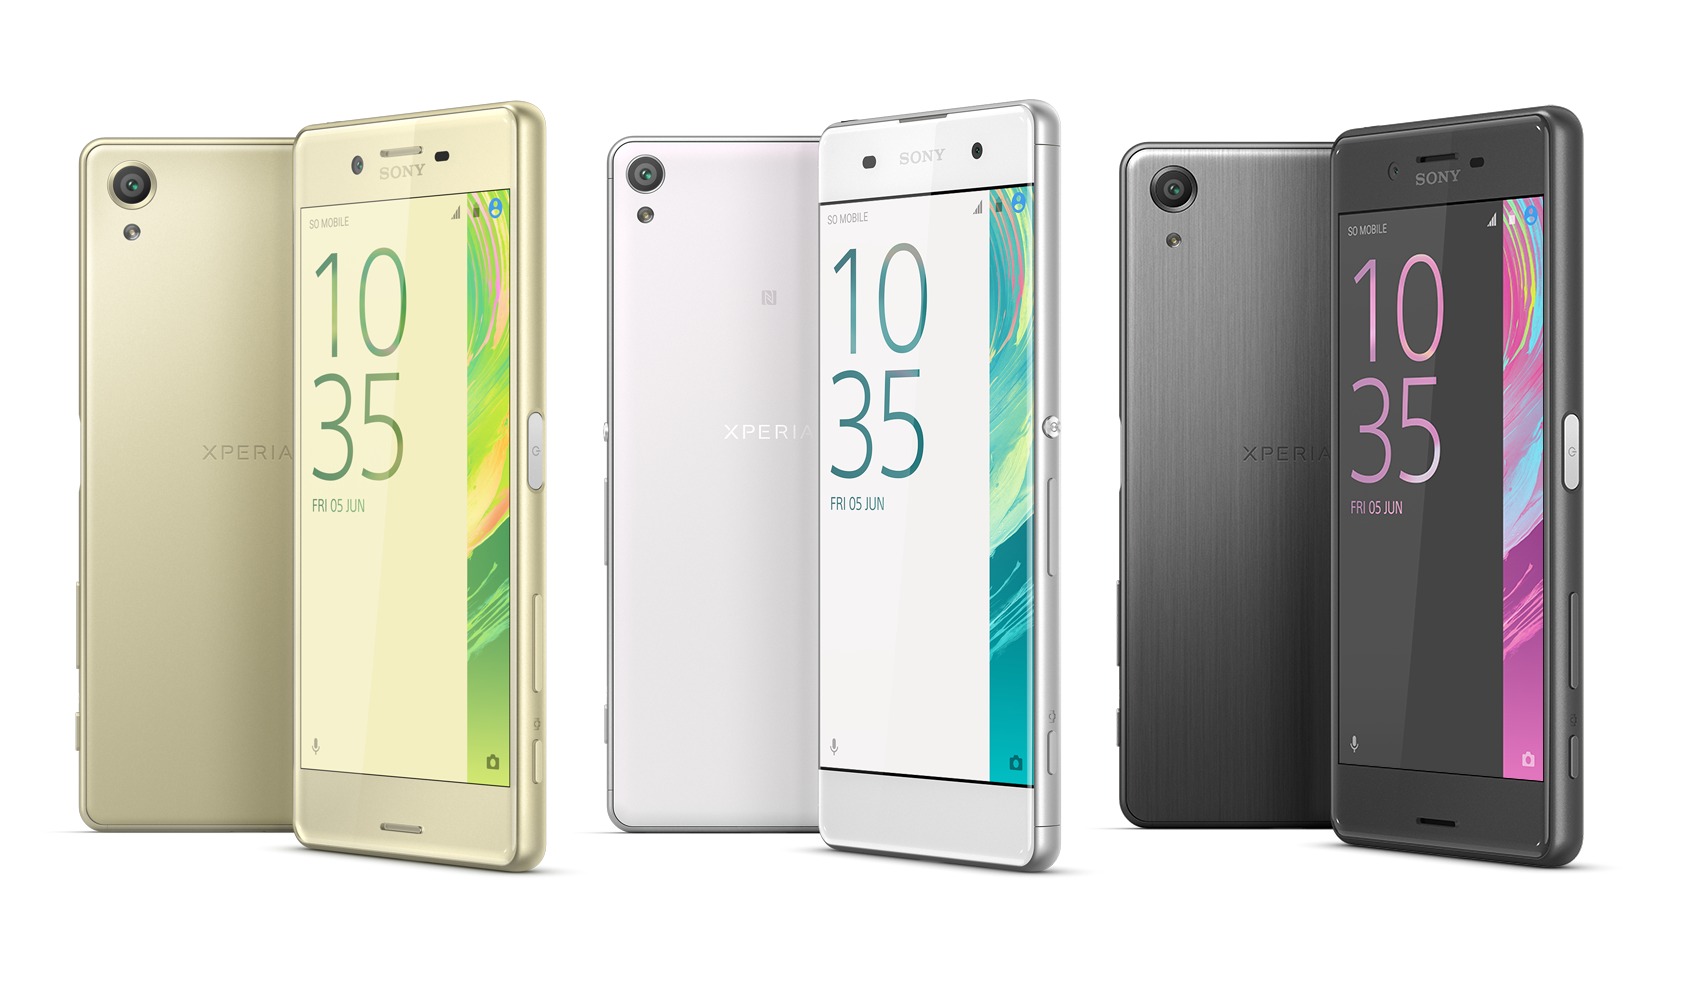 MWC 2016: Sony reveals the new Xperia X Series